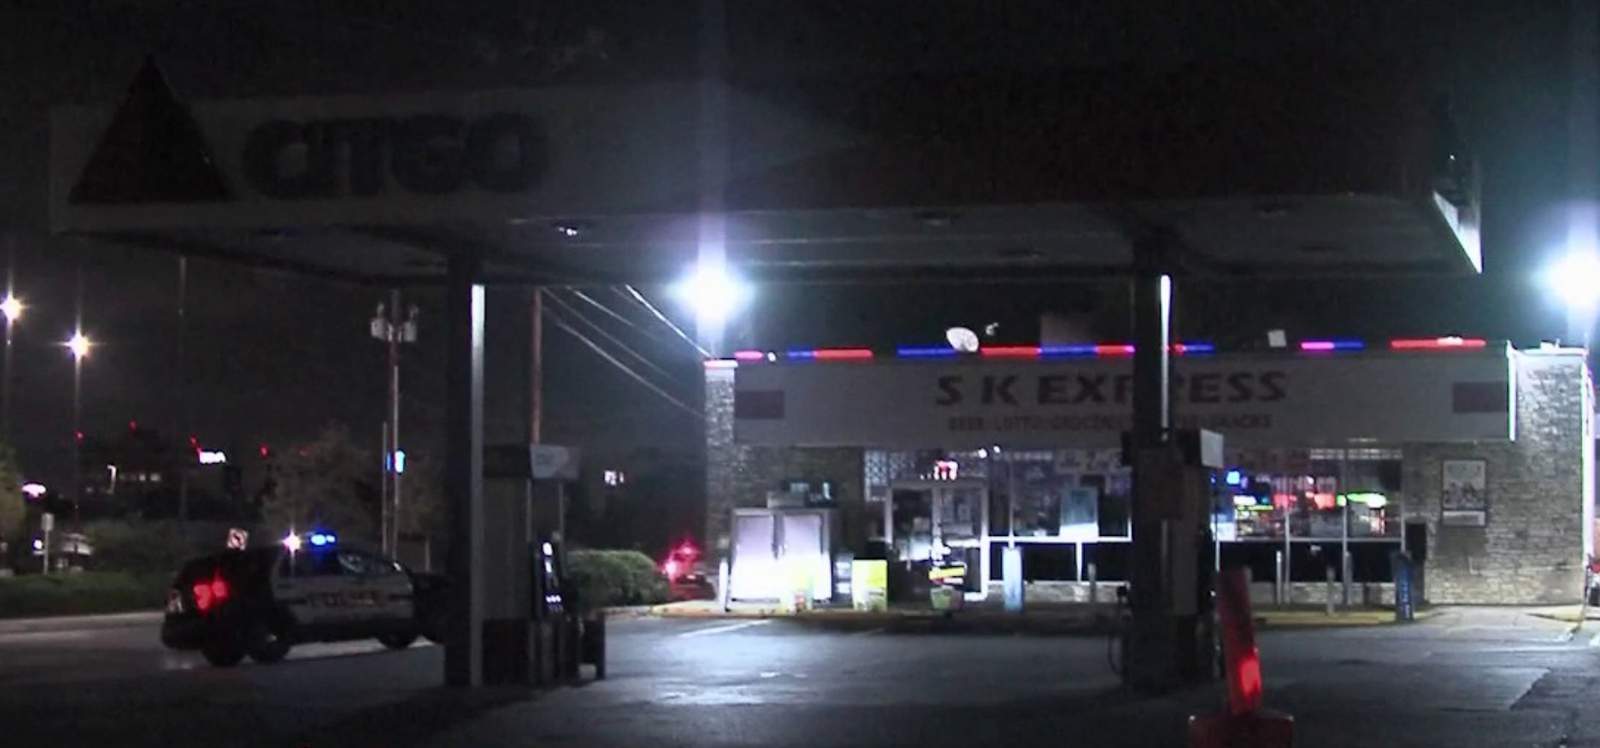 Man hospitalized after being stabbed in gas station parking lot, San Antonio police say